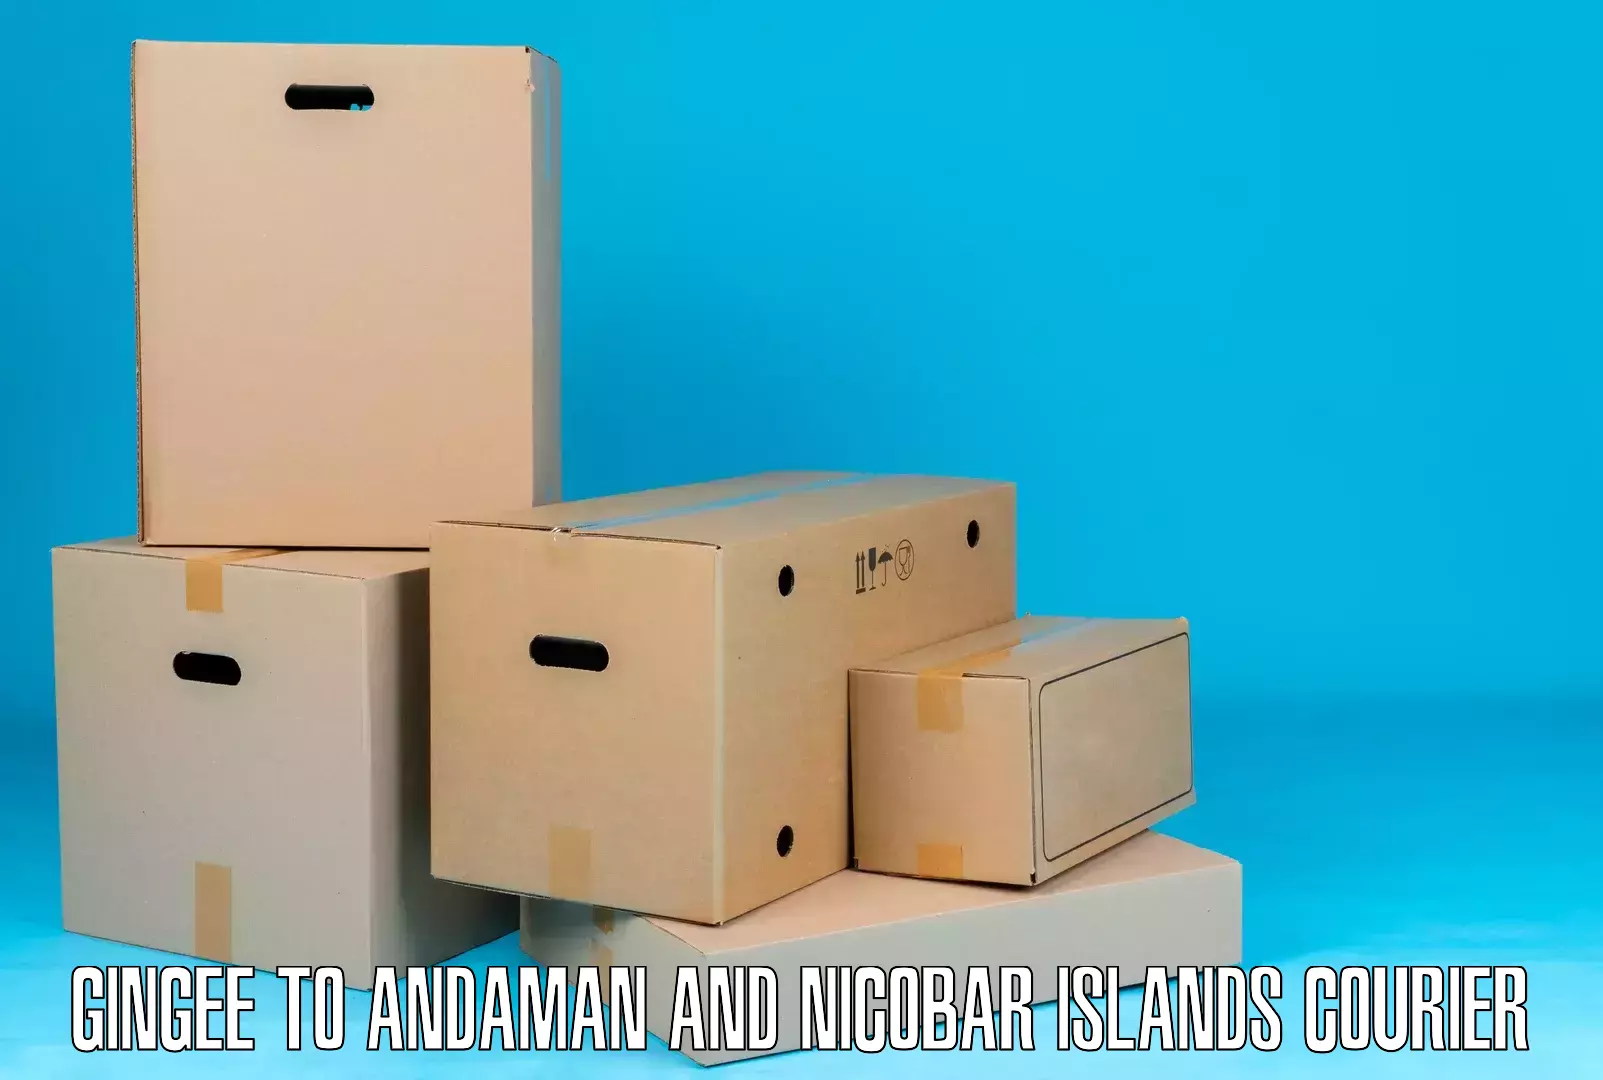 Professional courier handling Gingee to Andaman and Nicobar Islands